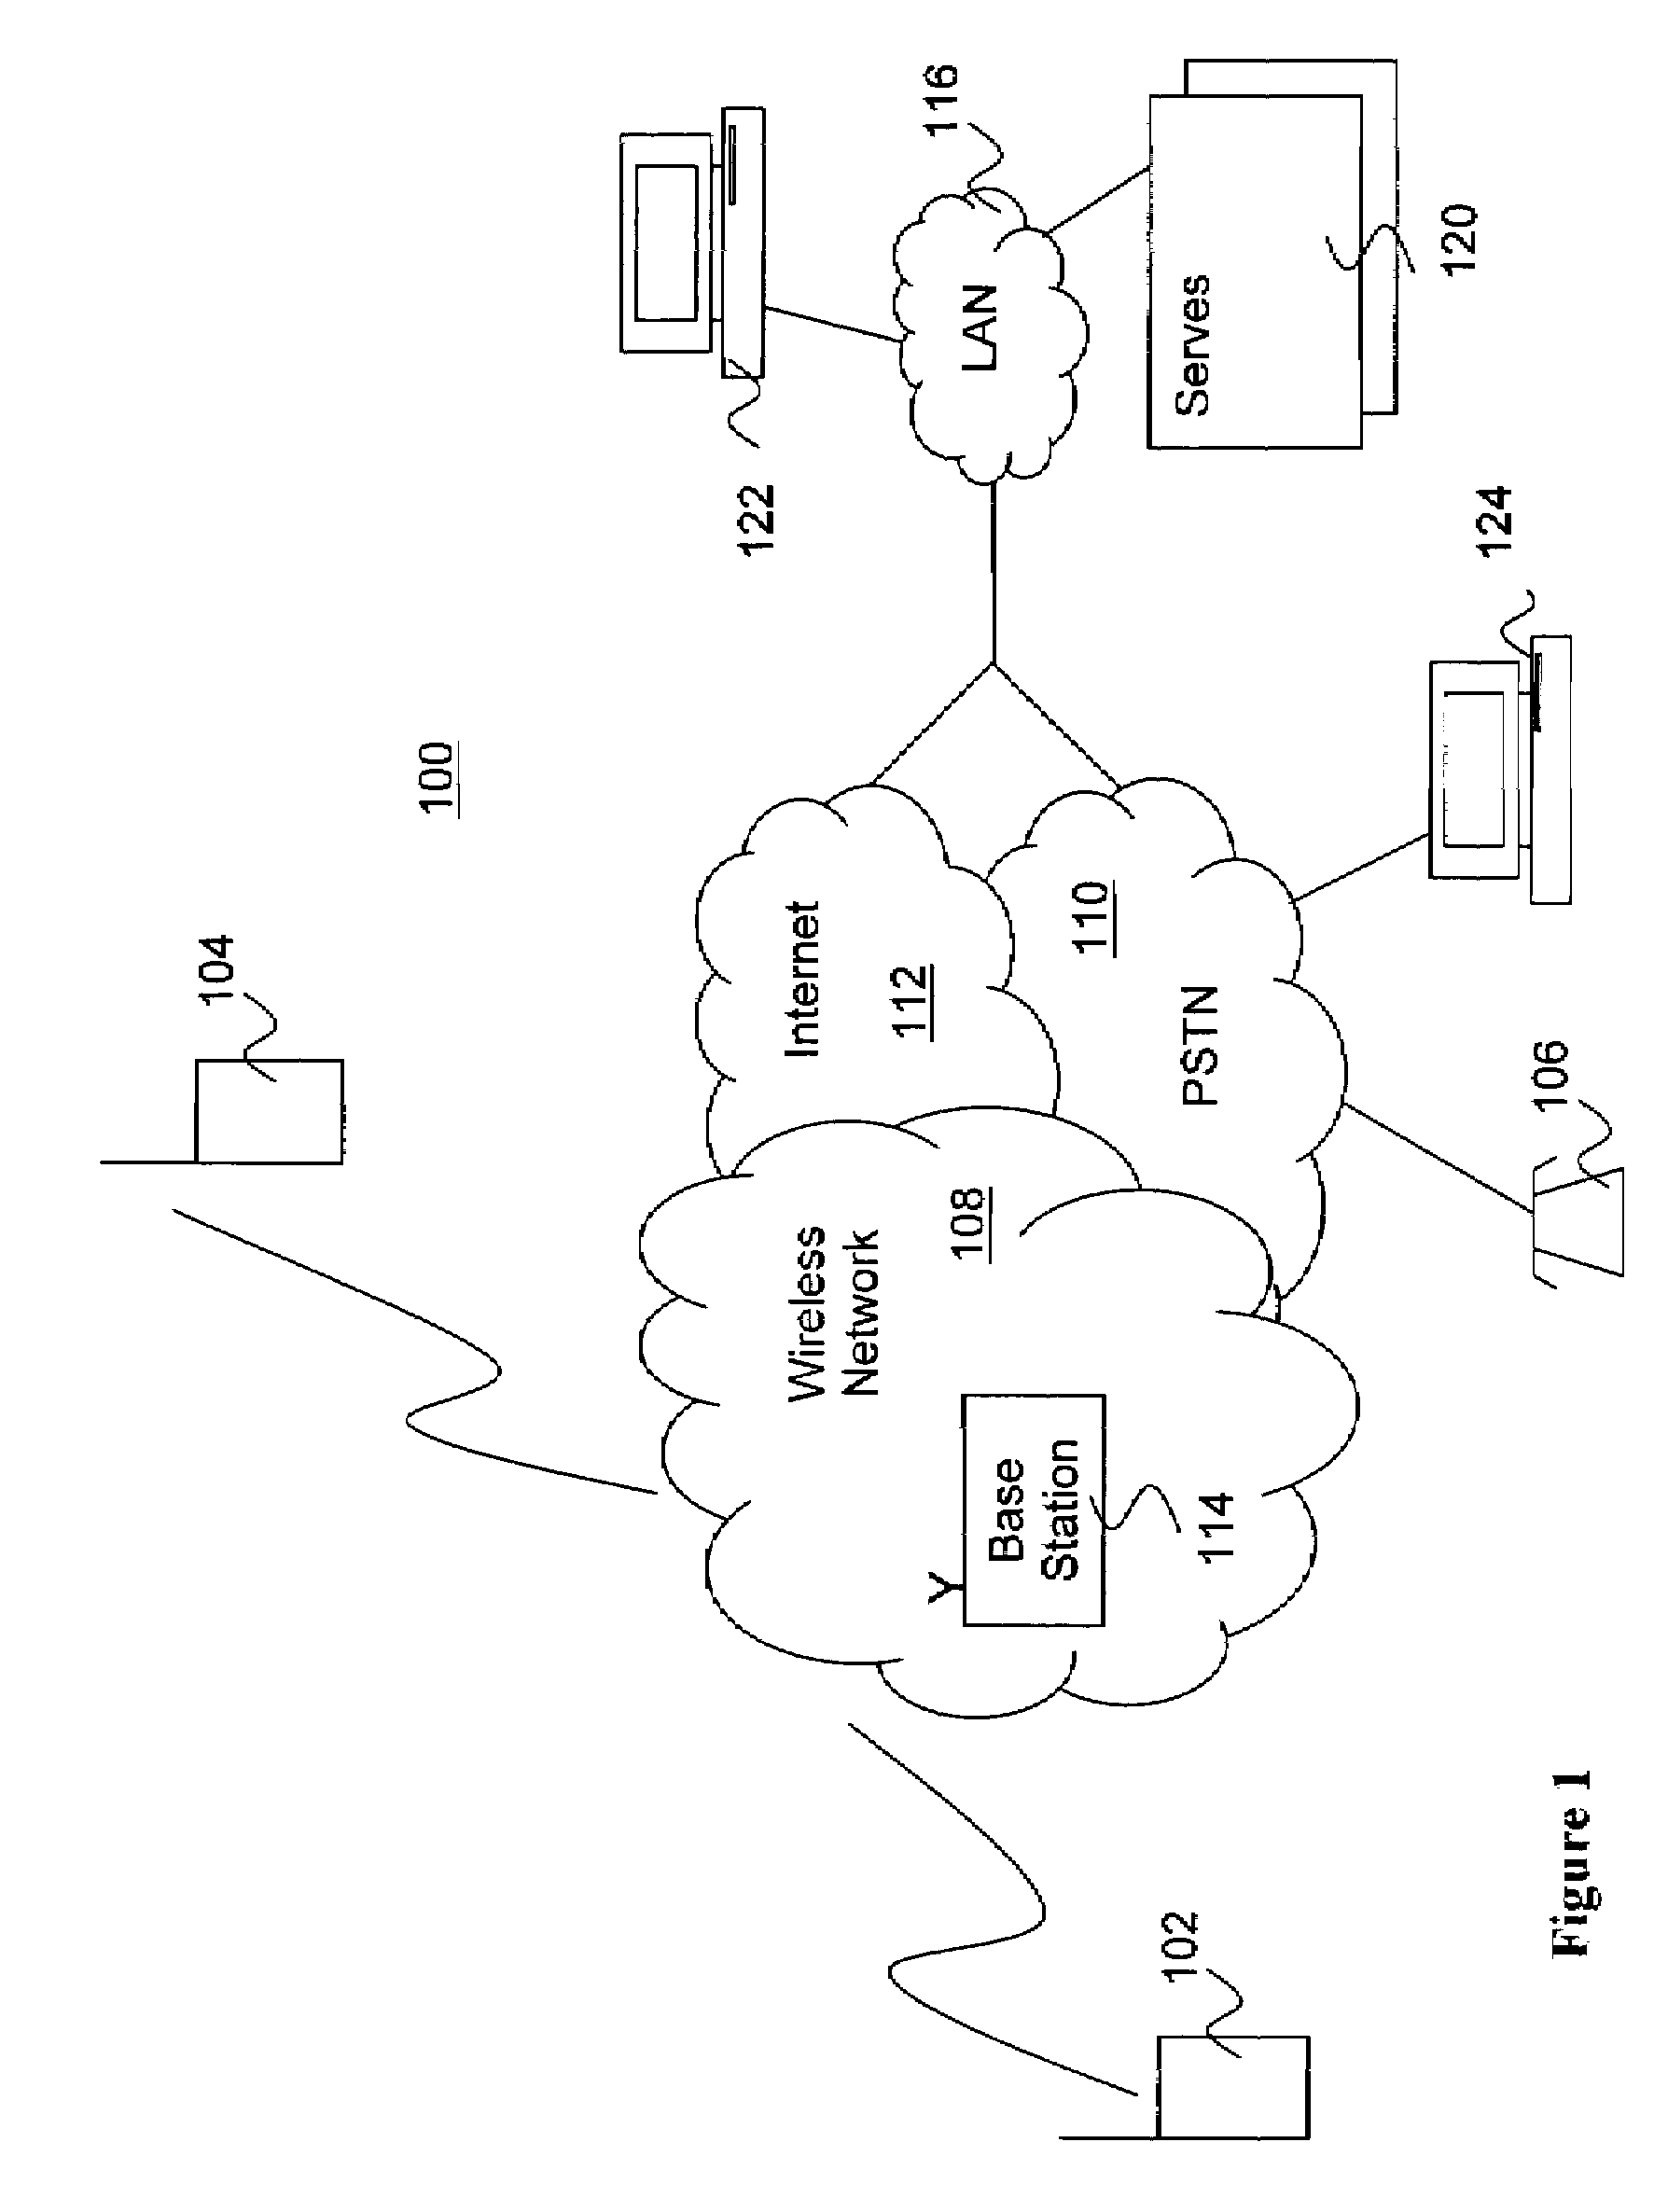 Unified communication thread for wireless mobile communication devices